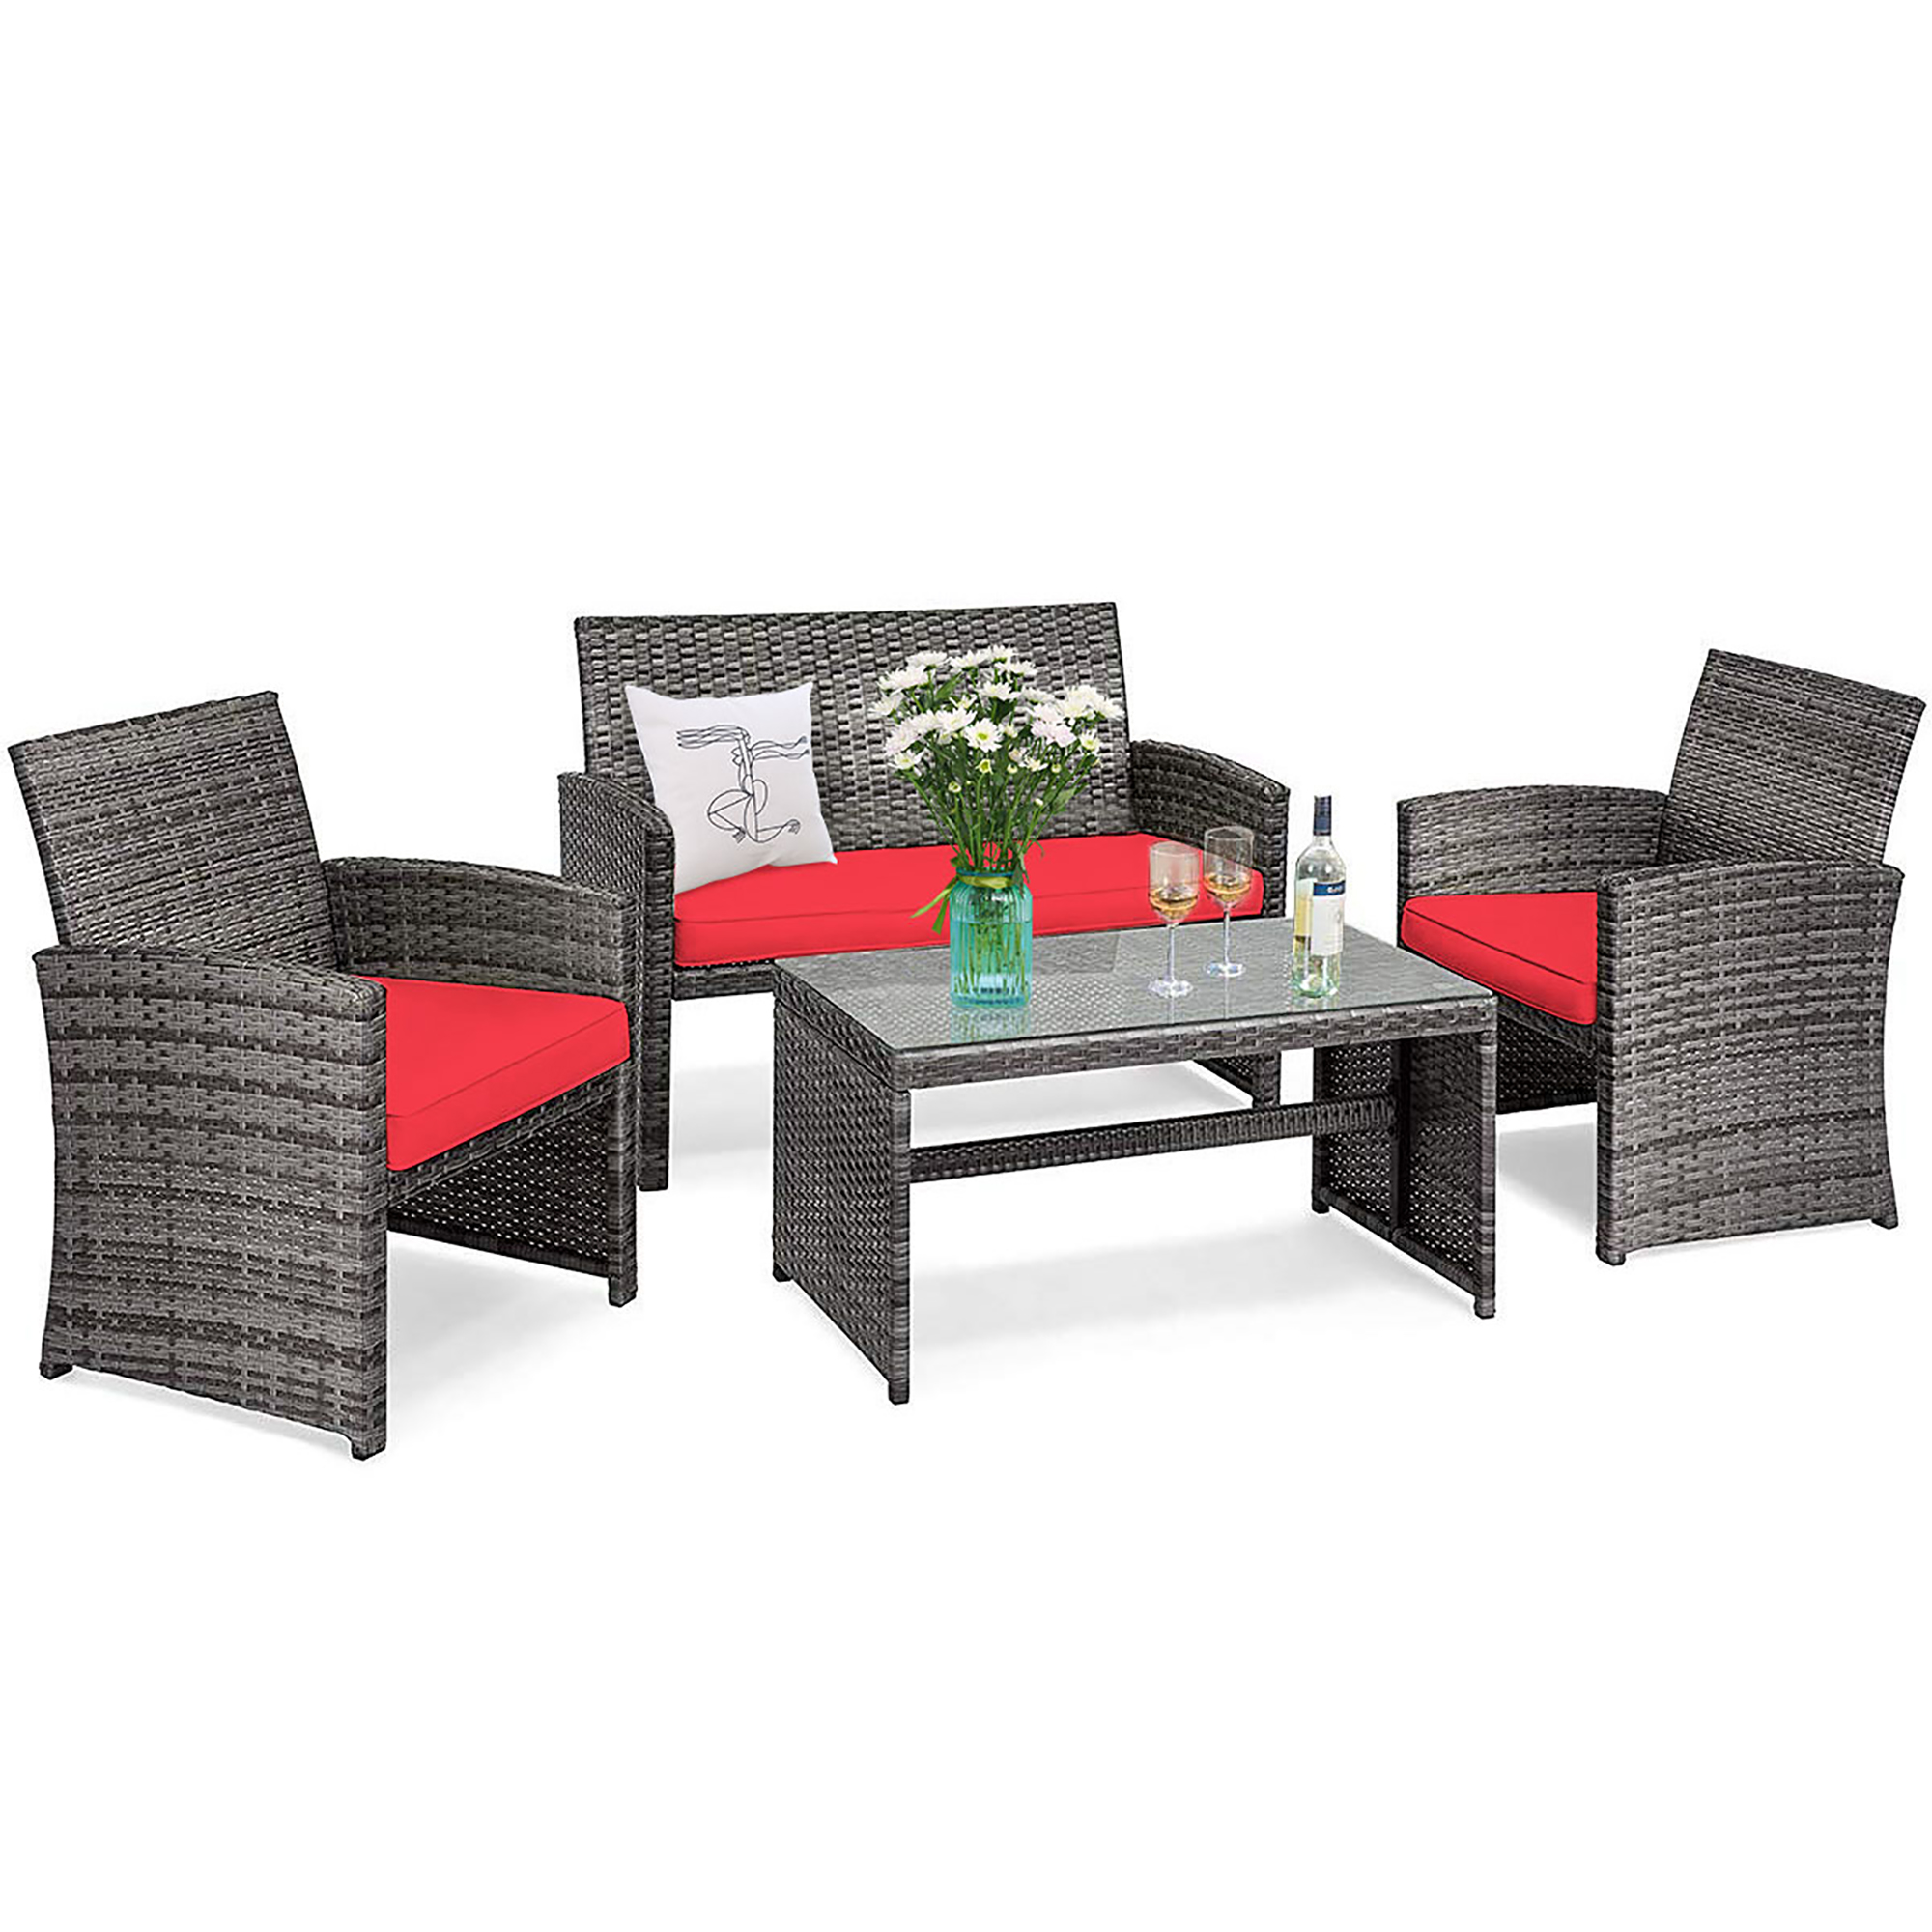 Costway 4PCS Patio Rattan Conversation Glass Table Top Cushioned Sofa Red - image 8 of 10